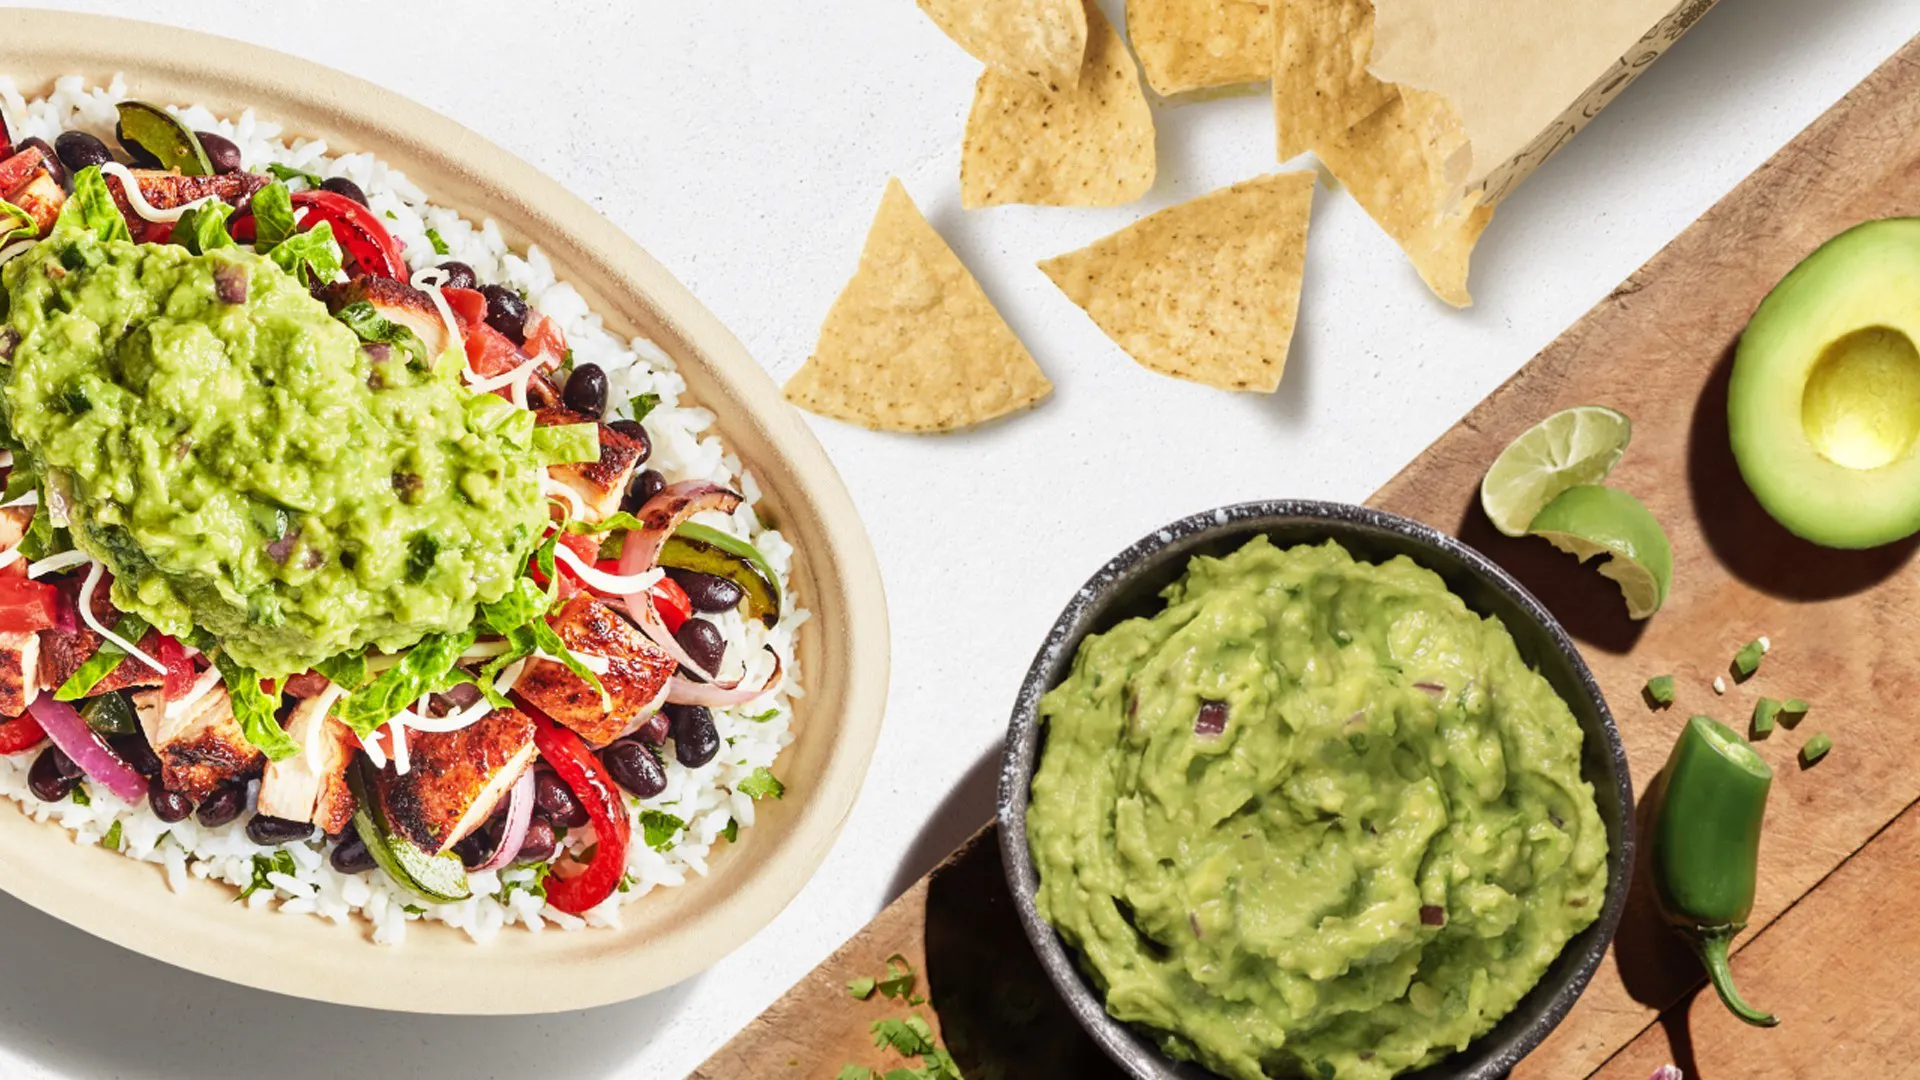 How To Get Free Guac At Chipotle